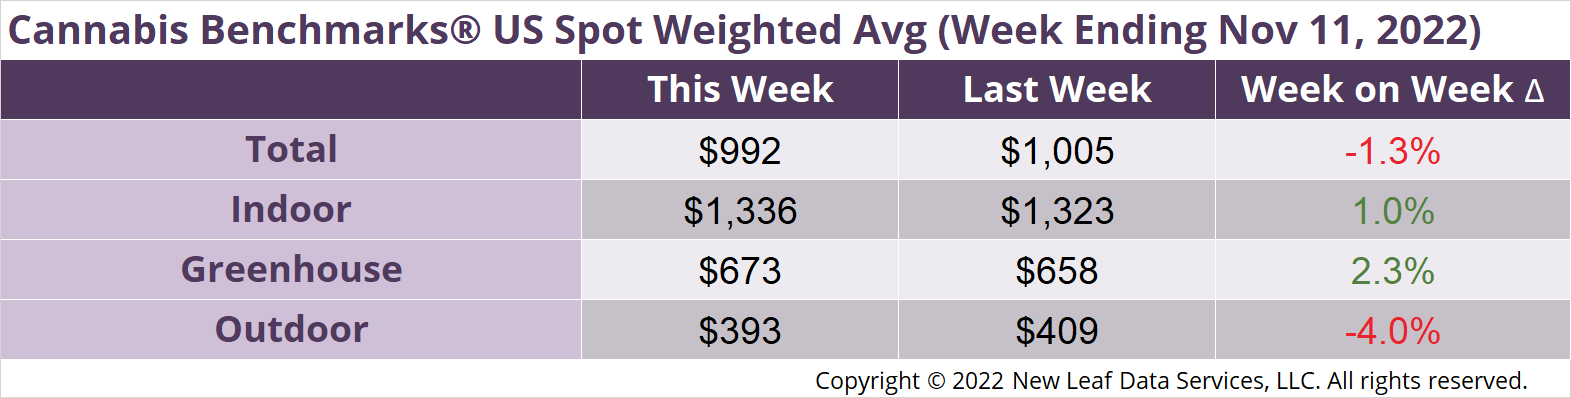 Cannabis Benchmarks U.S. Spot Weighted Average Prices November 11, 2022